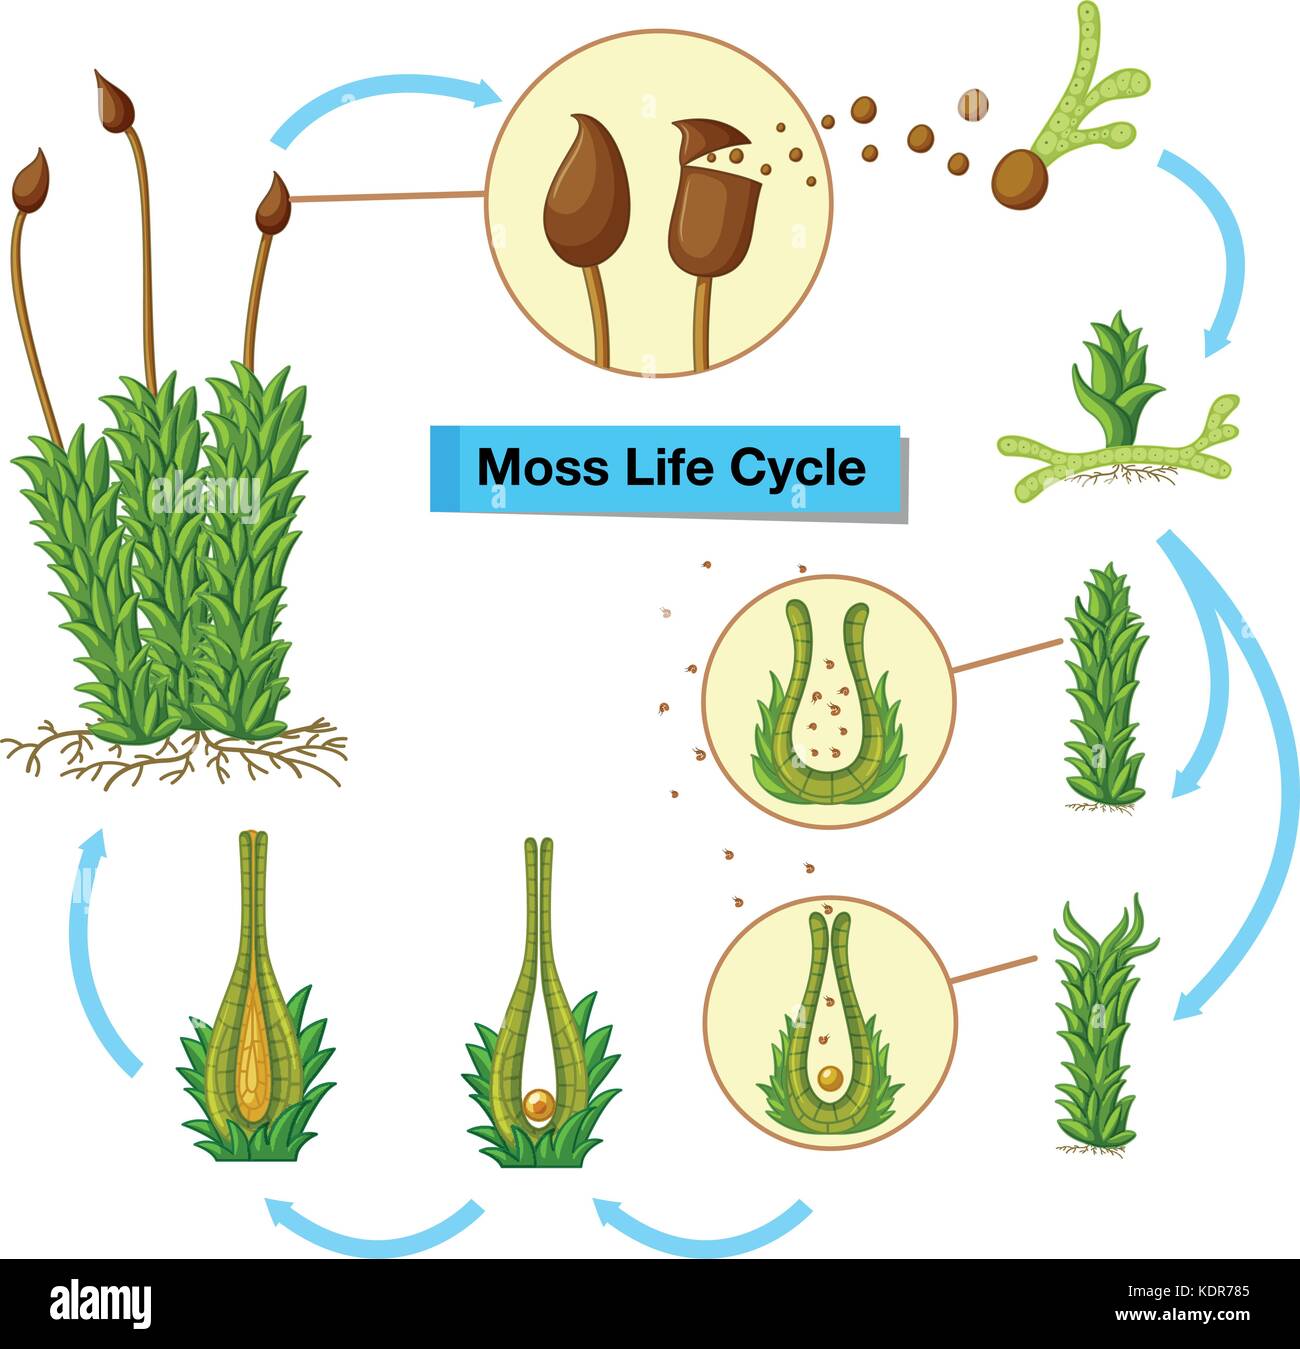 Structure, Characteristics and Life Cycle of Moss Plant